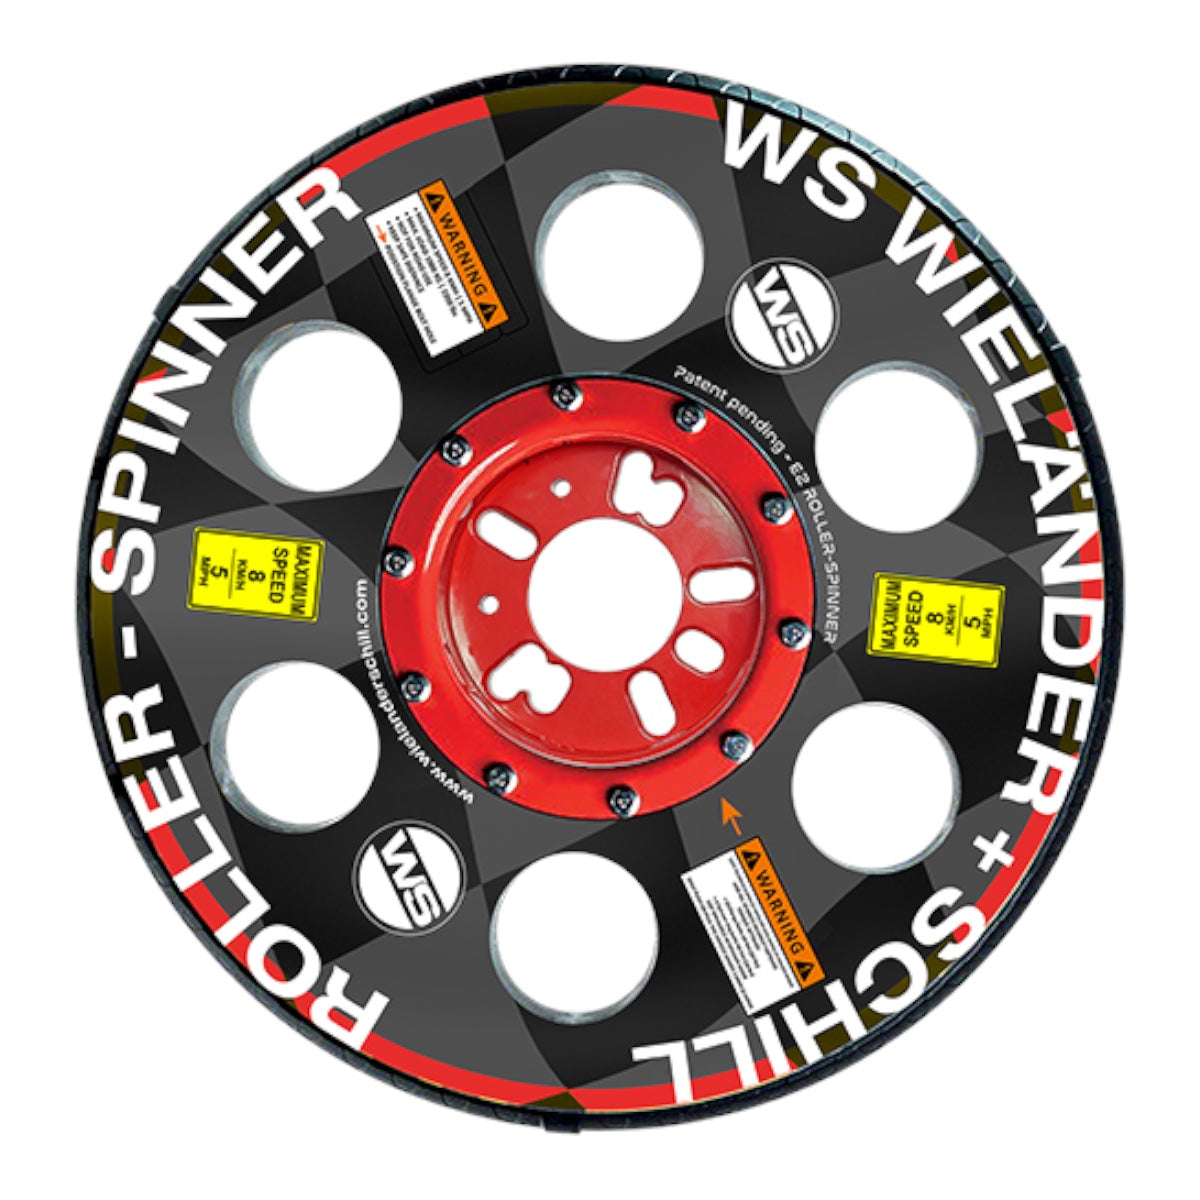 WS roller spinner | 5/6 painting wheel, spare wheel and maneuvering aid 